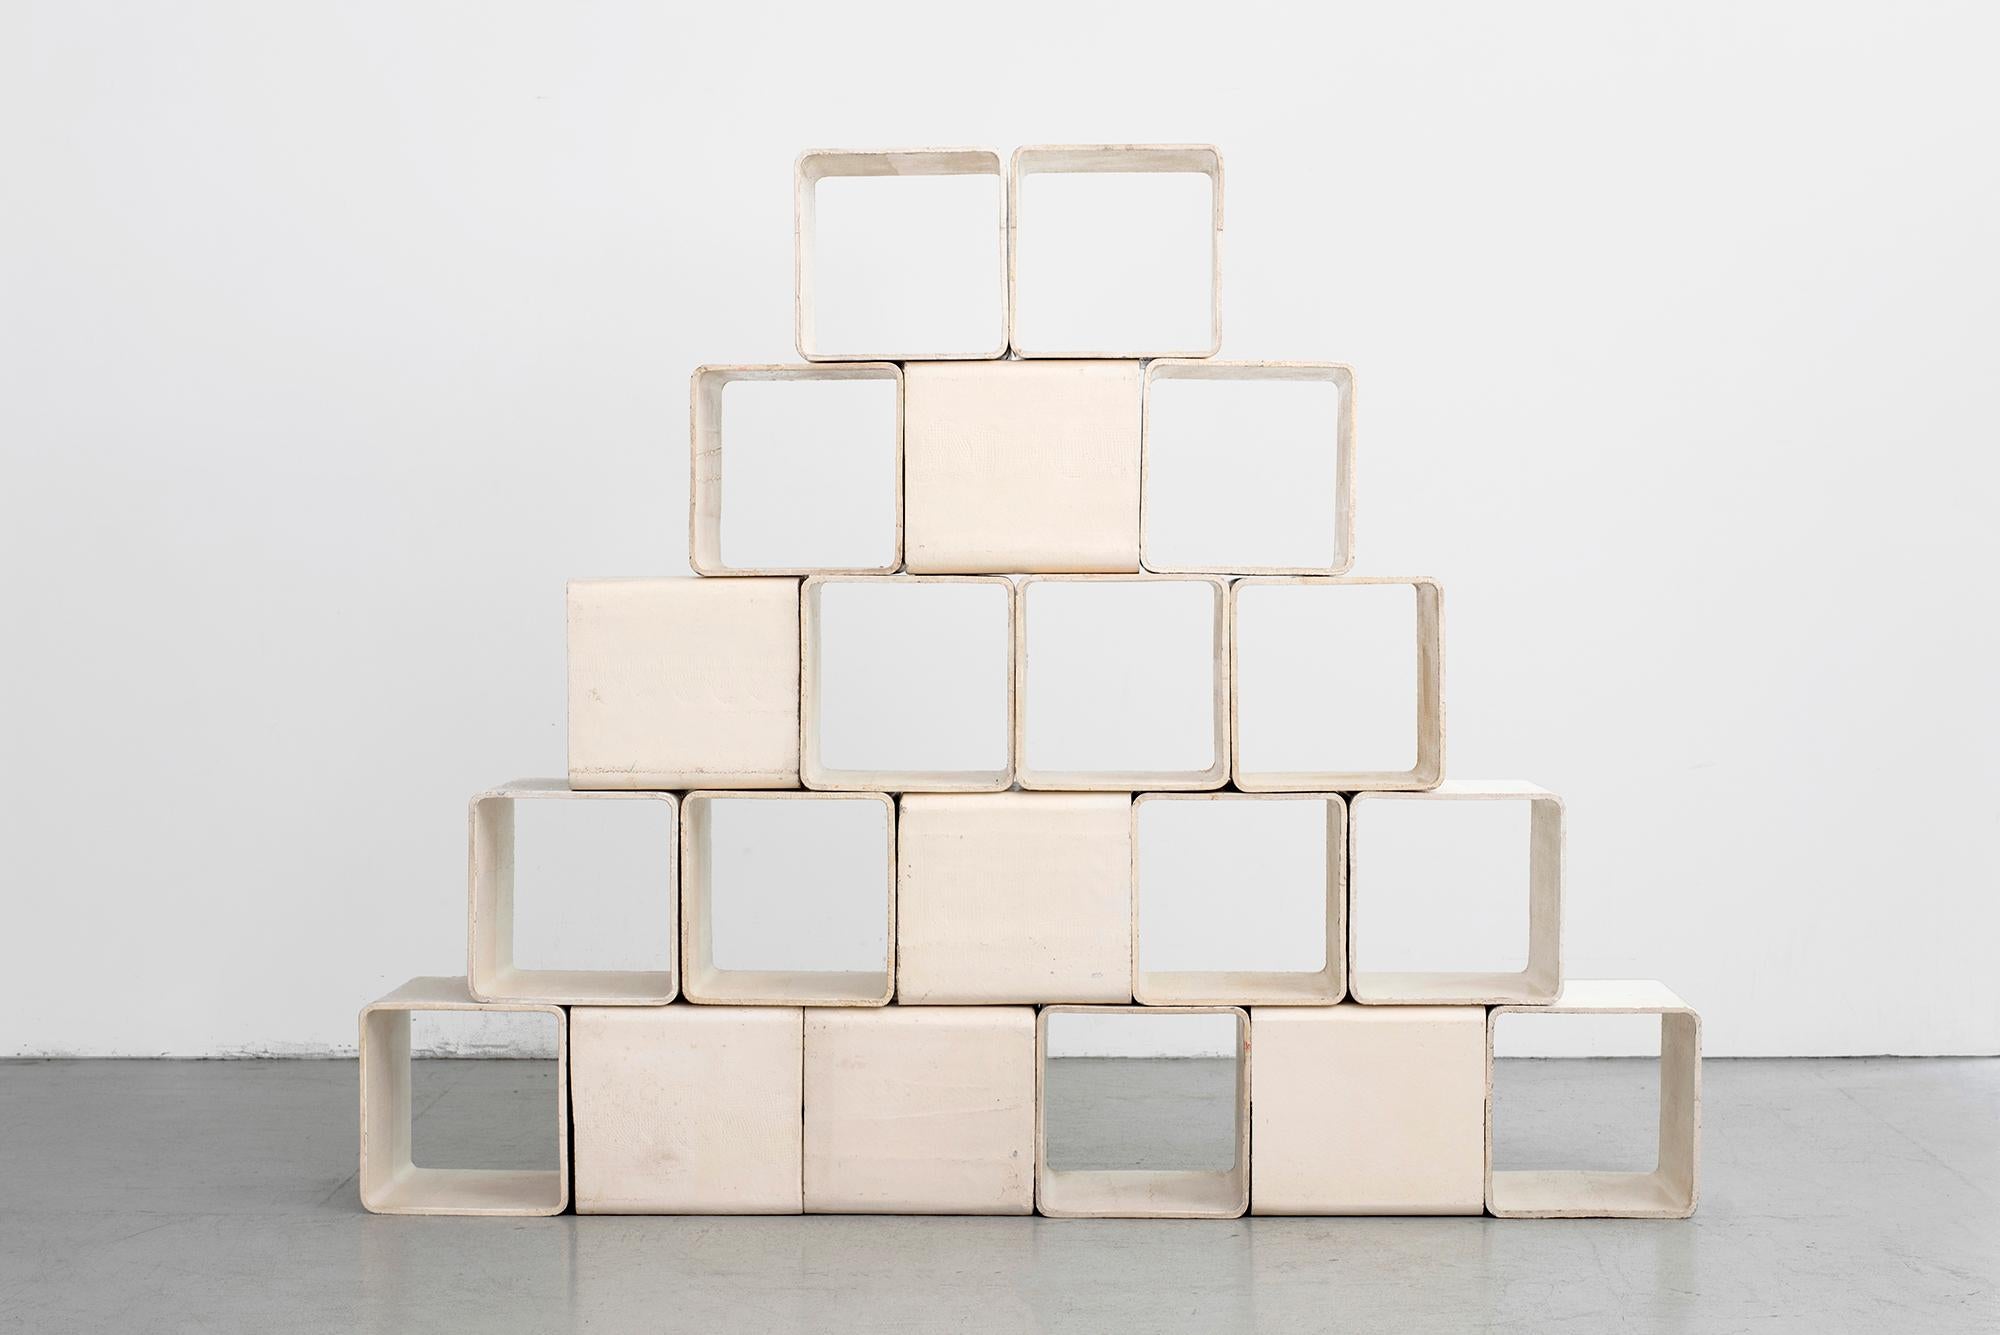 Rare large set of cement and fiber modular shelving cubes by Swiss Architect Willy Guhl. 
Each cement cube is freestanding and light weight and can be arranged in multiple ways. 
Original white finish with varying patina. 
Would make an